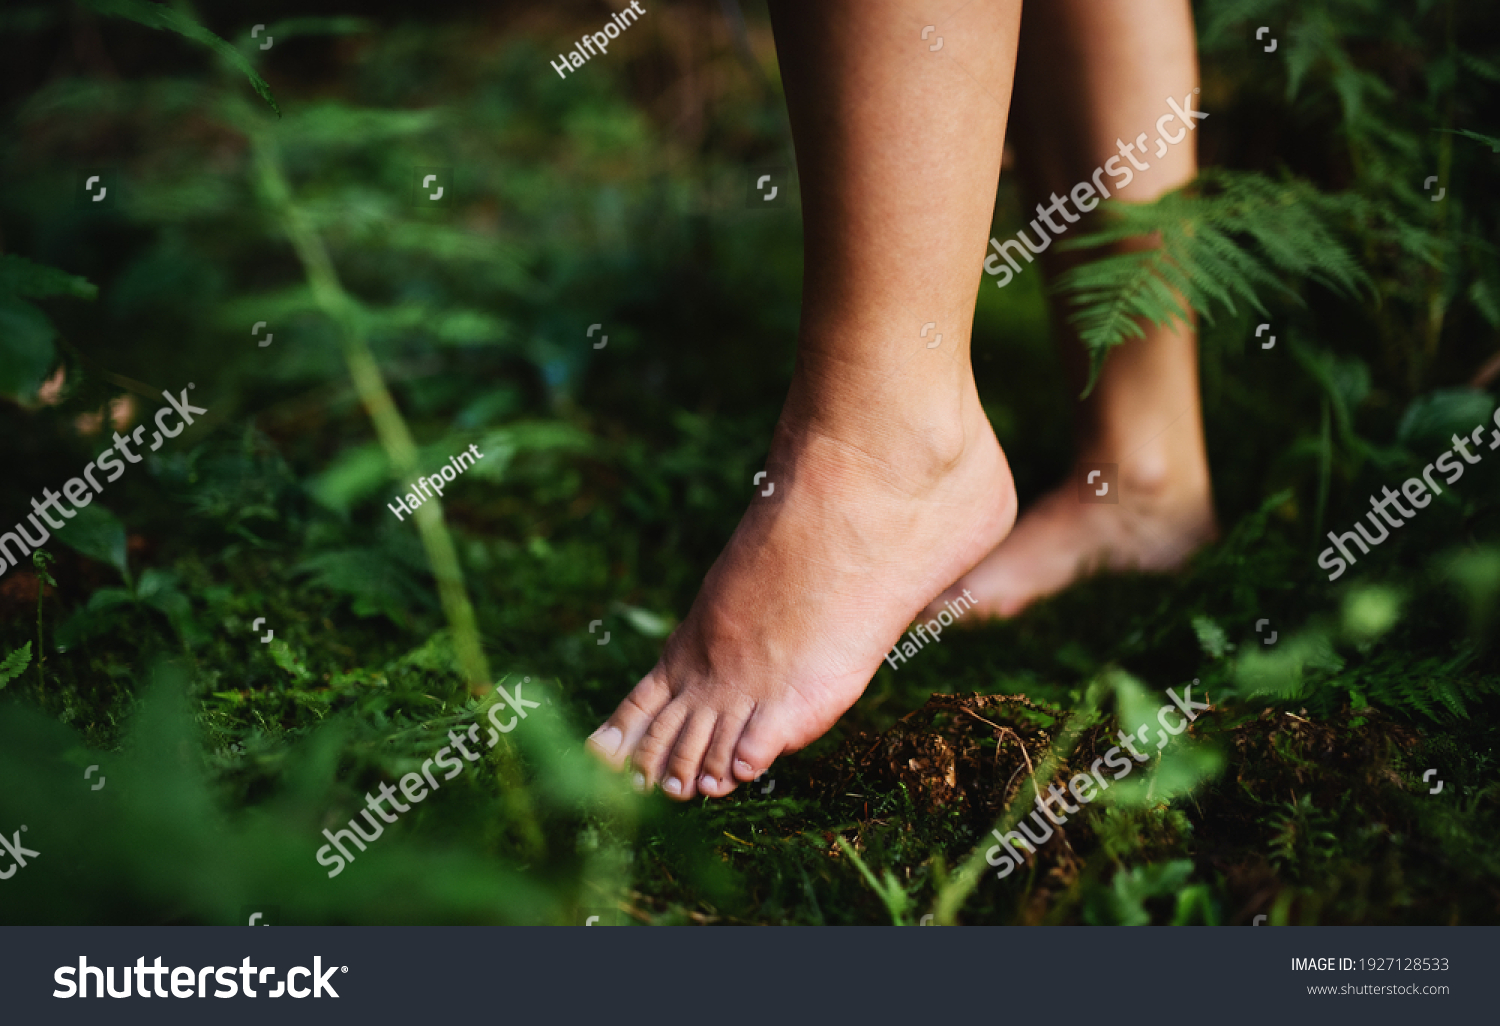 Bare feet of woman standing barefoot outdoors in nature, grounding concept. #1927128533